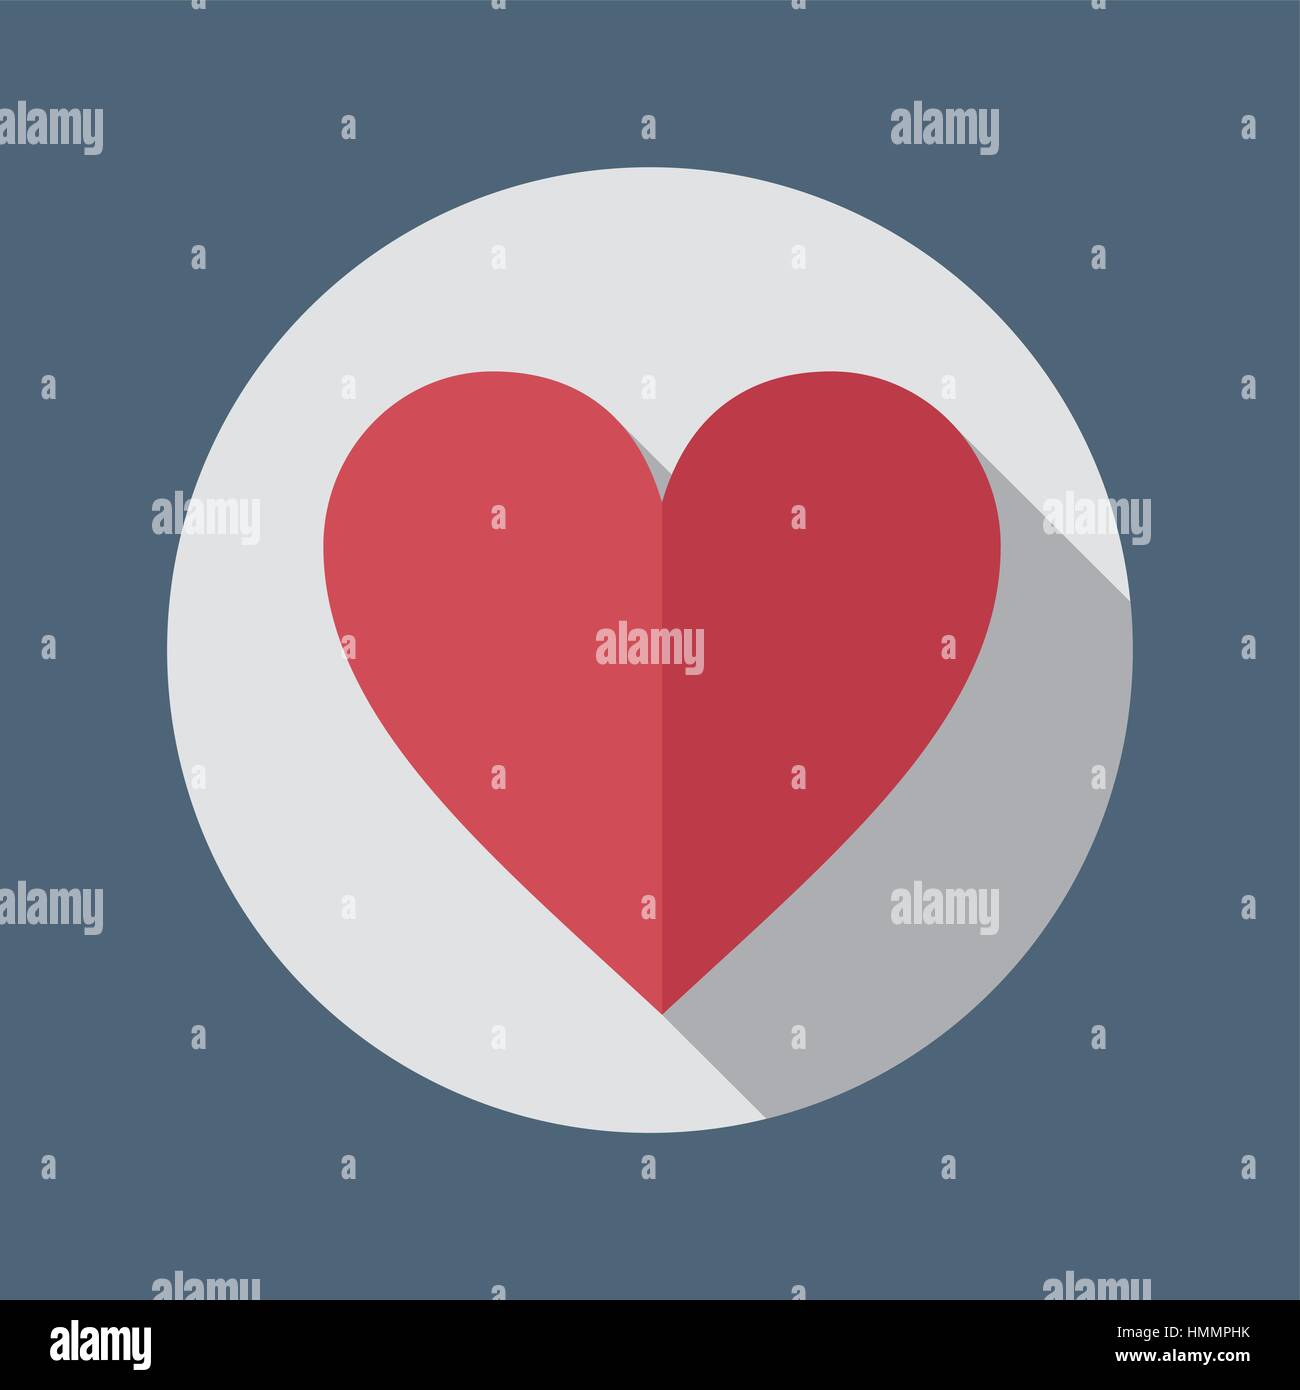 Red heart flat icon on gray background in a circle. Vector illustration in EPS8 format. Stock Vector